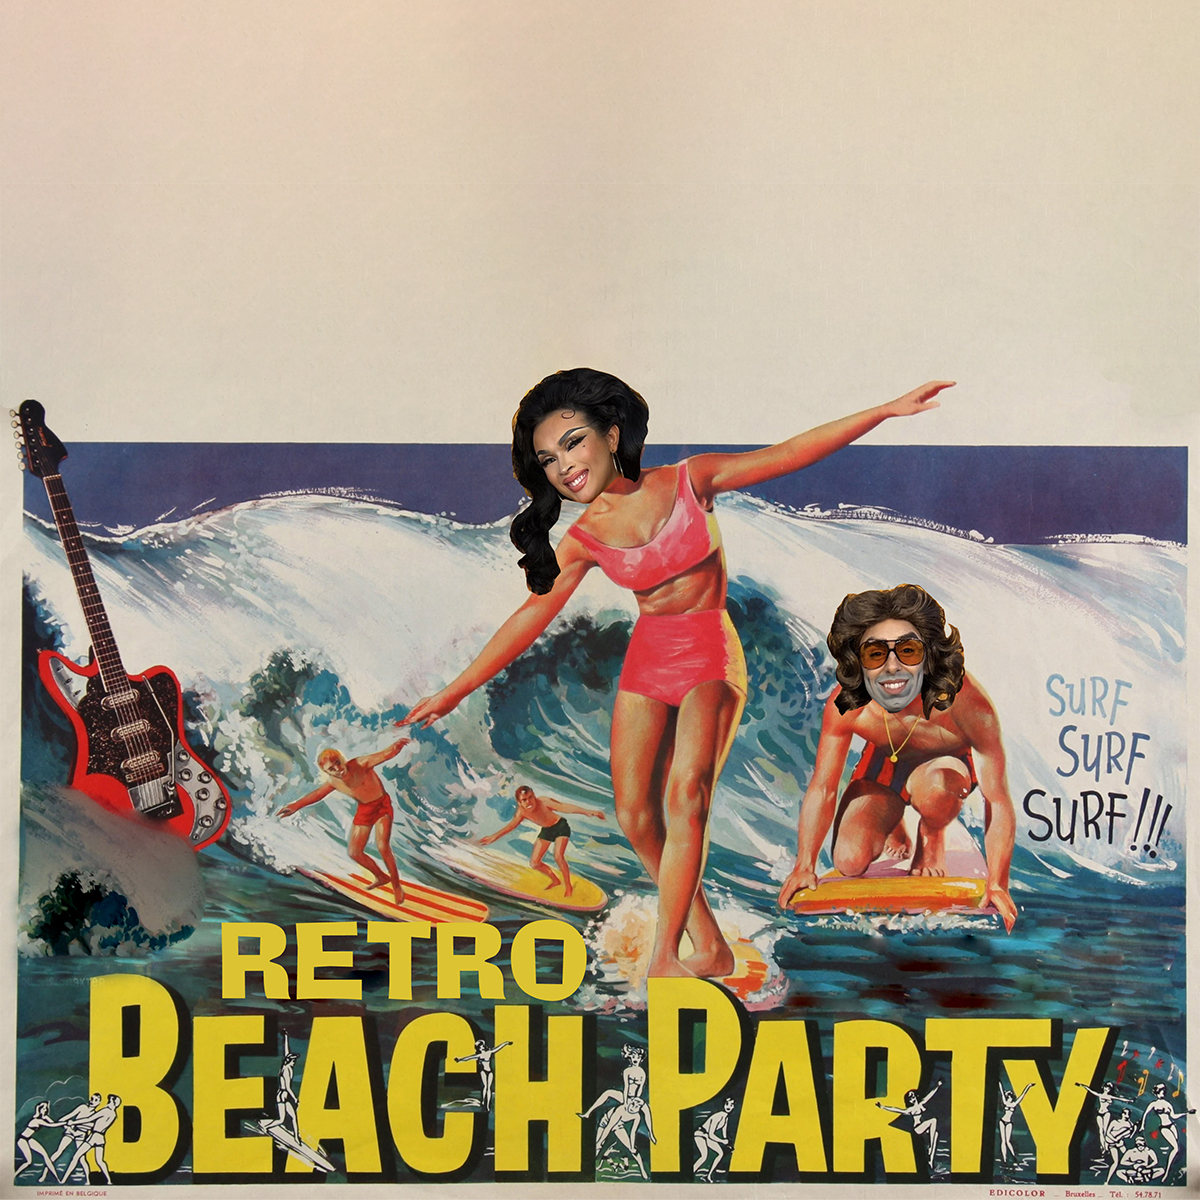 Text reading "Retro Beach Party" across a cutout image of Briar and Rusty surfing